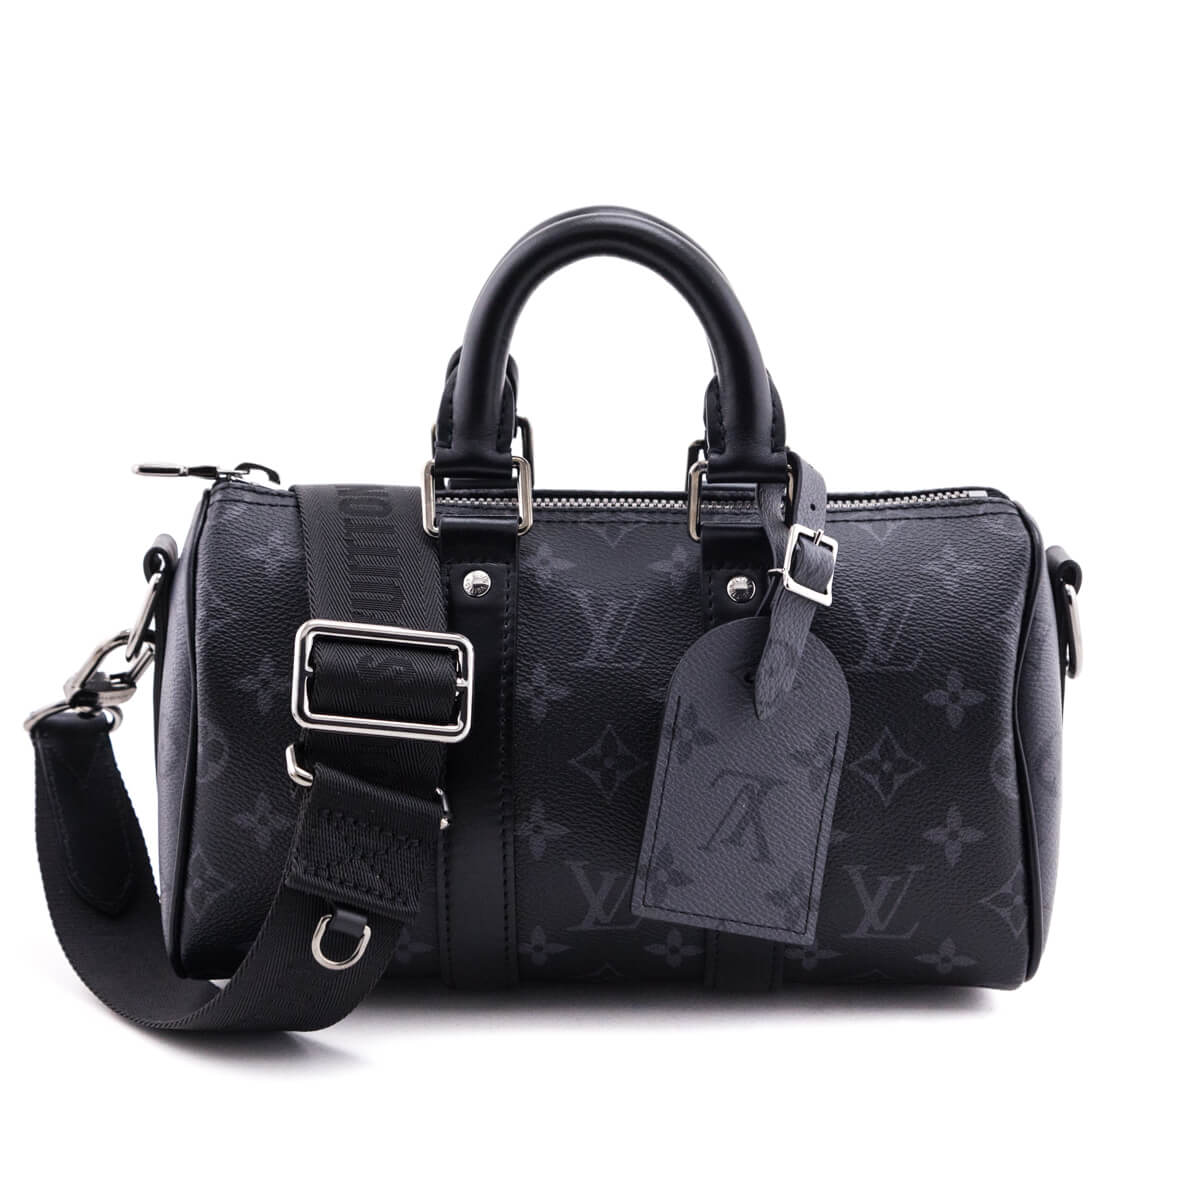 Louis Vuitton Reverse Monogram Eclipse Keepall Bandouliere 25 - Love that Bag etc - Preowned Authentic Designer Handbags & Preloved Fashions